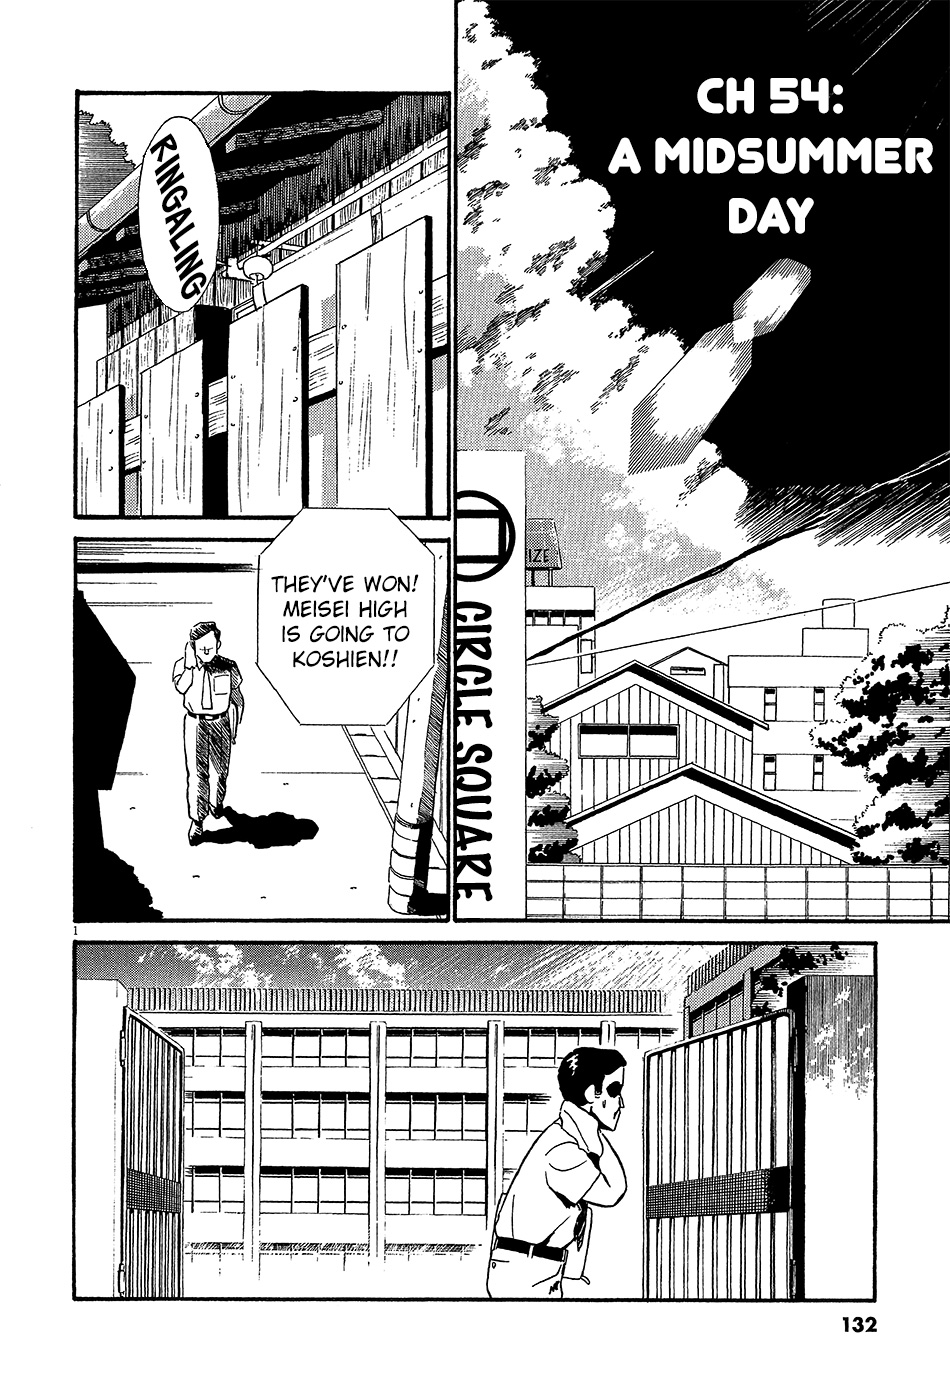 Kyuukyoku Choujin R Vol.5 Chapter 54: A Midsummer Day - Picture 3